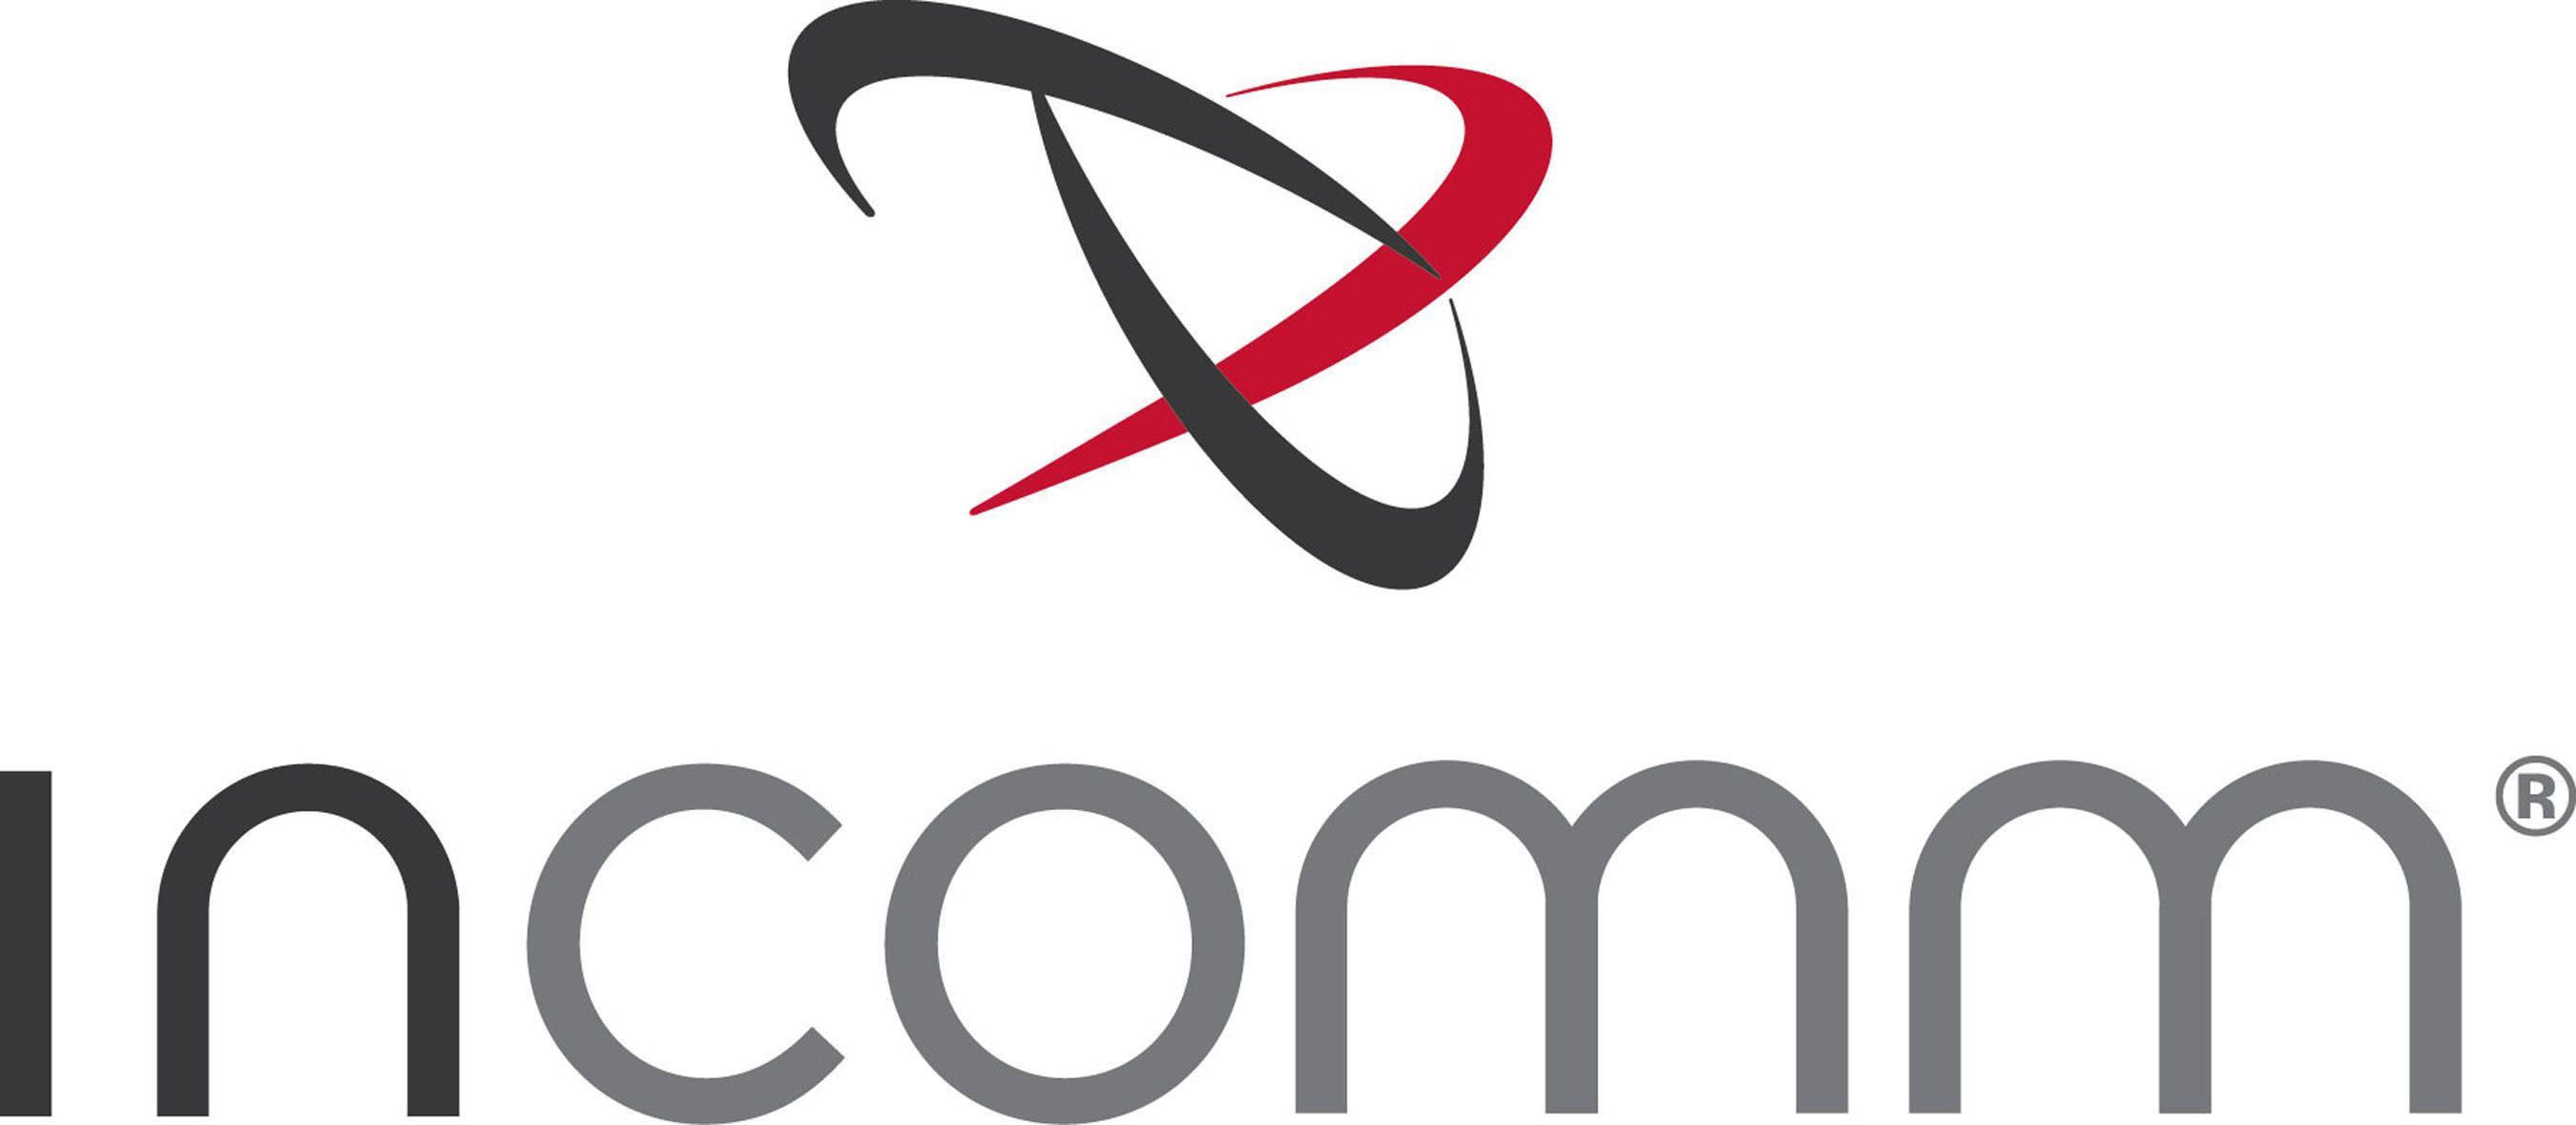 Inncomm Logo - InComm Internal Holiday Data Shows Strong Growth in Digital Gift